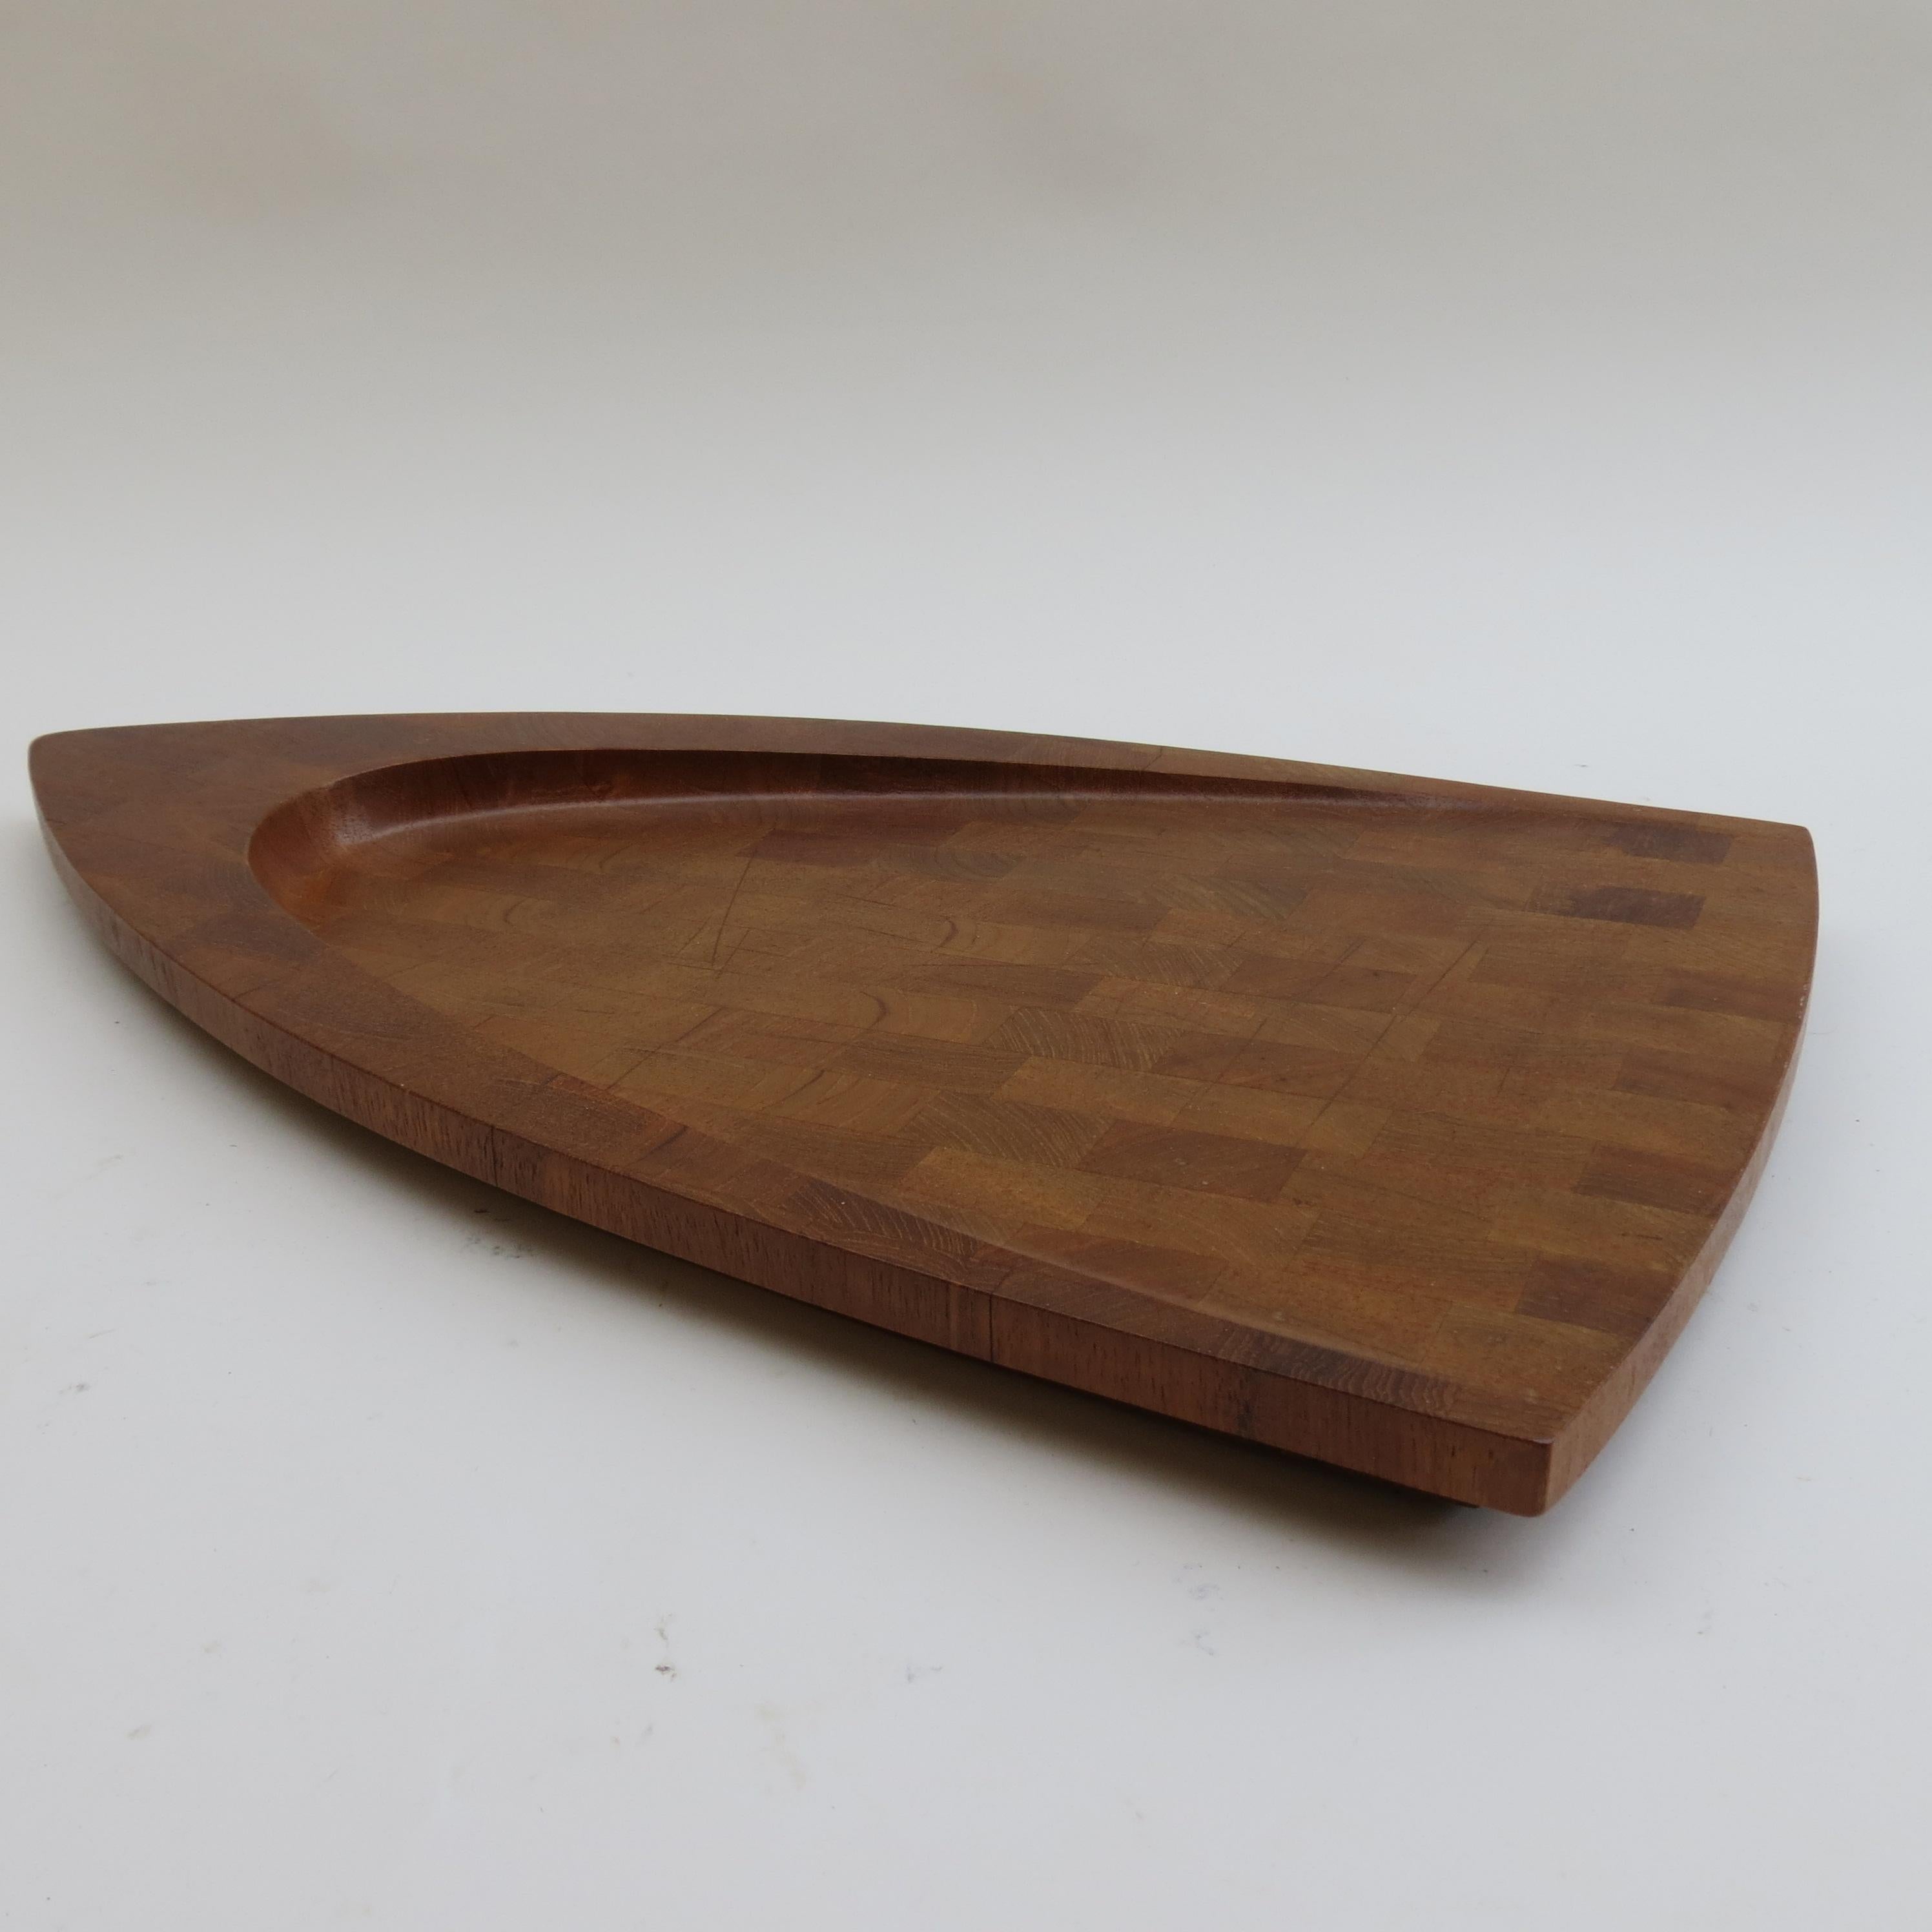 A large shaped serving tray or cutting board designed by Fleming Digsmed and produced by Digsmed, Denmark in 1964. Made from solid Teak blocked and shaped. Stamped to the underside with the Digsmed stamp, Denmark 1964.